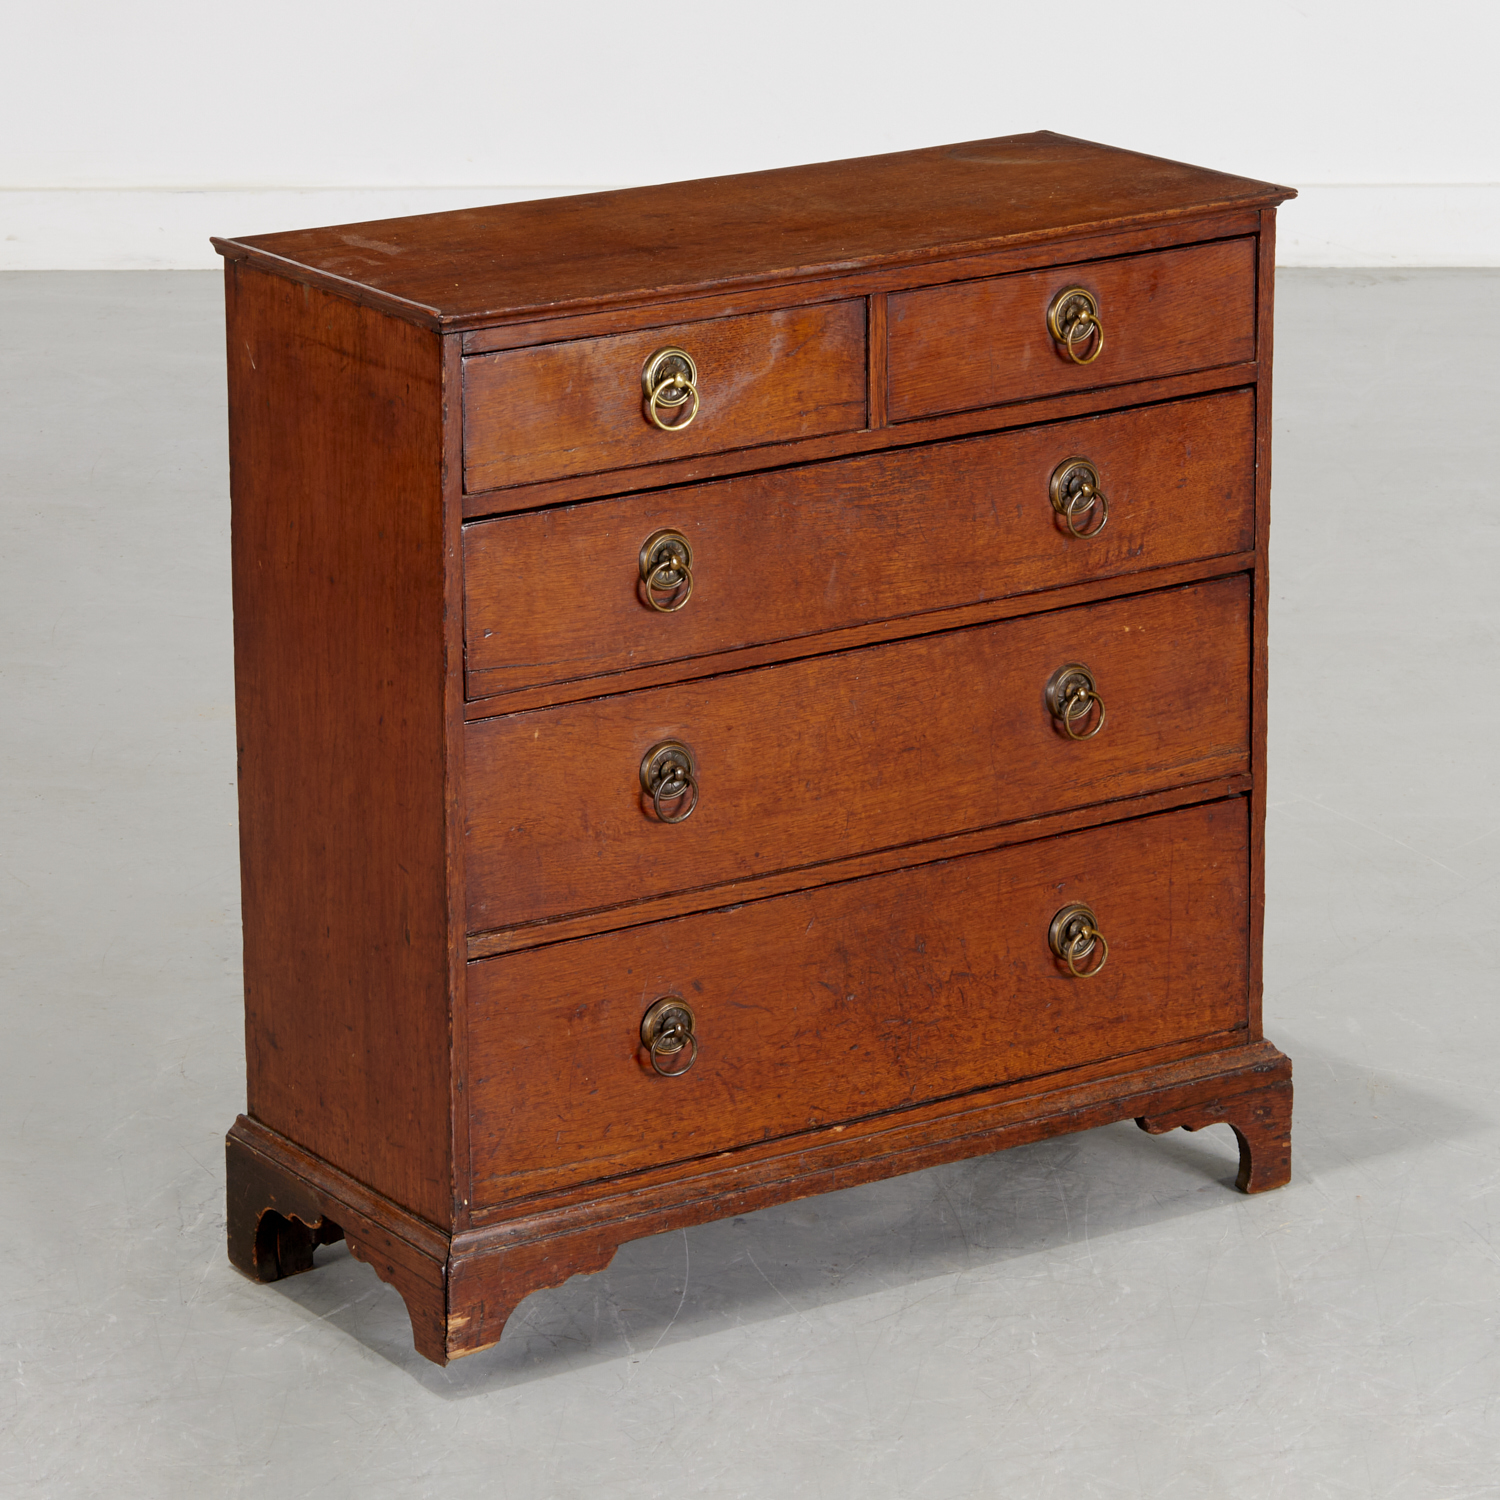 ANTIQUE ENGLISH OAK CHEST OF DRAWERS 2fc538